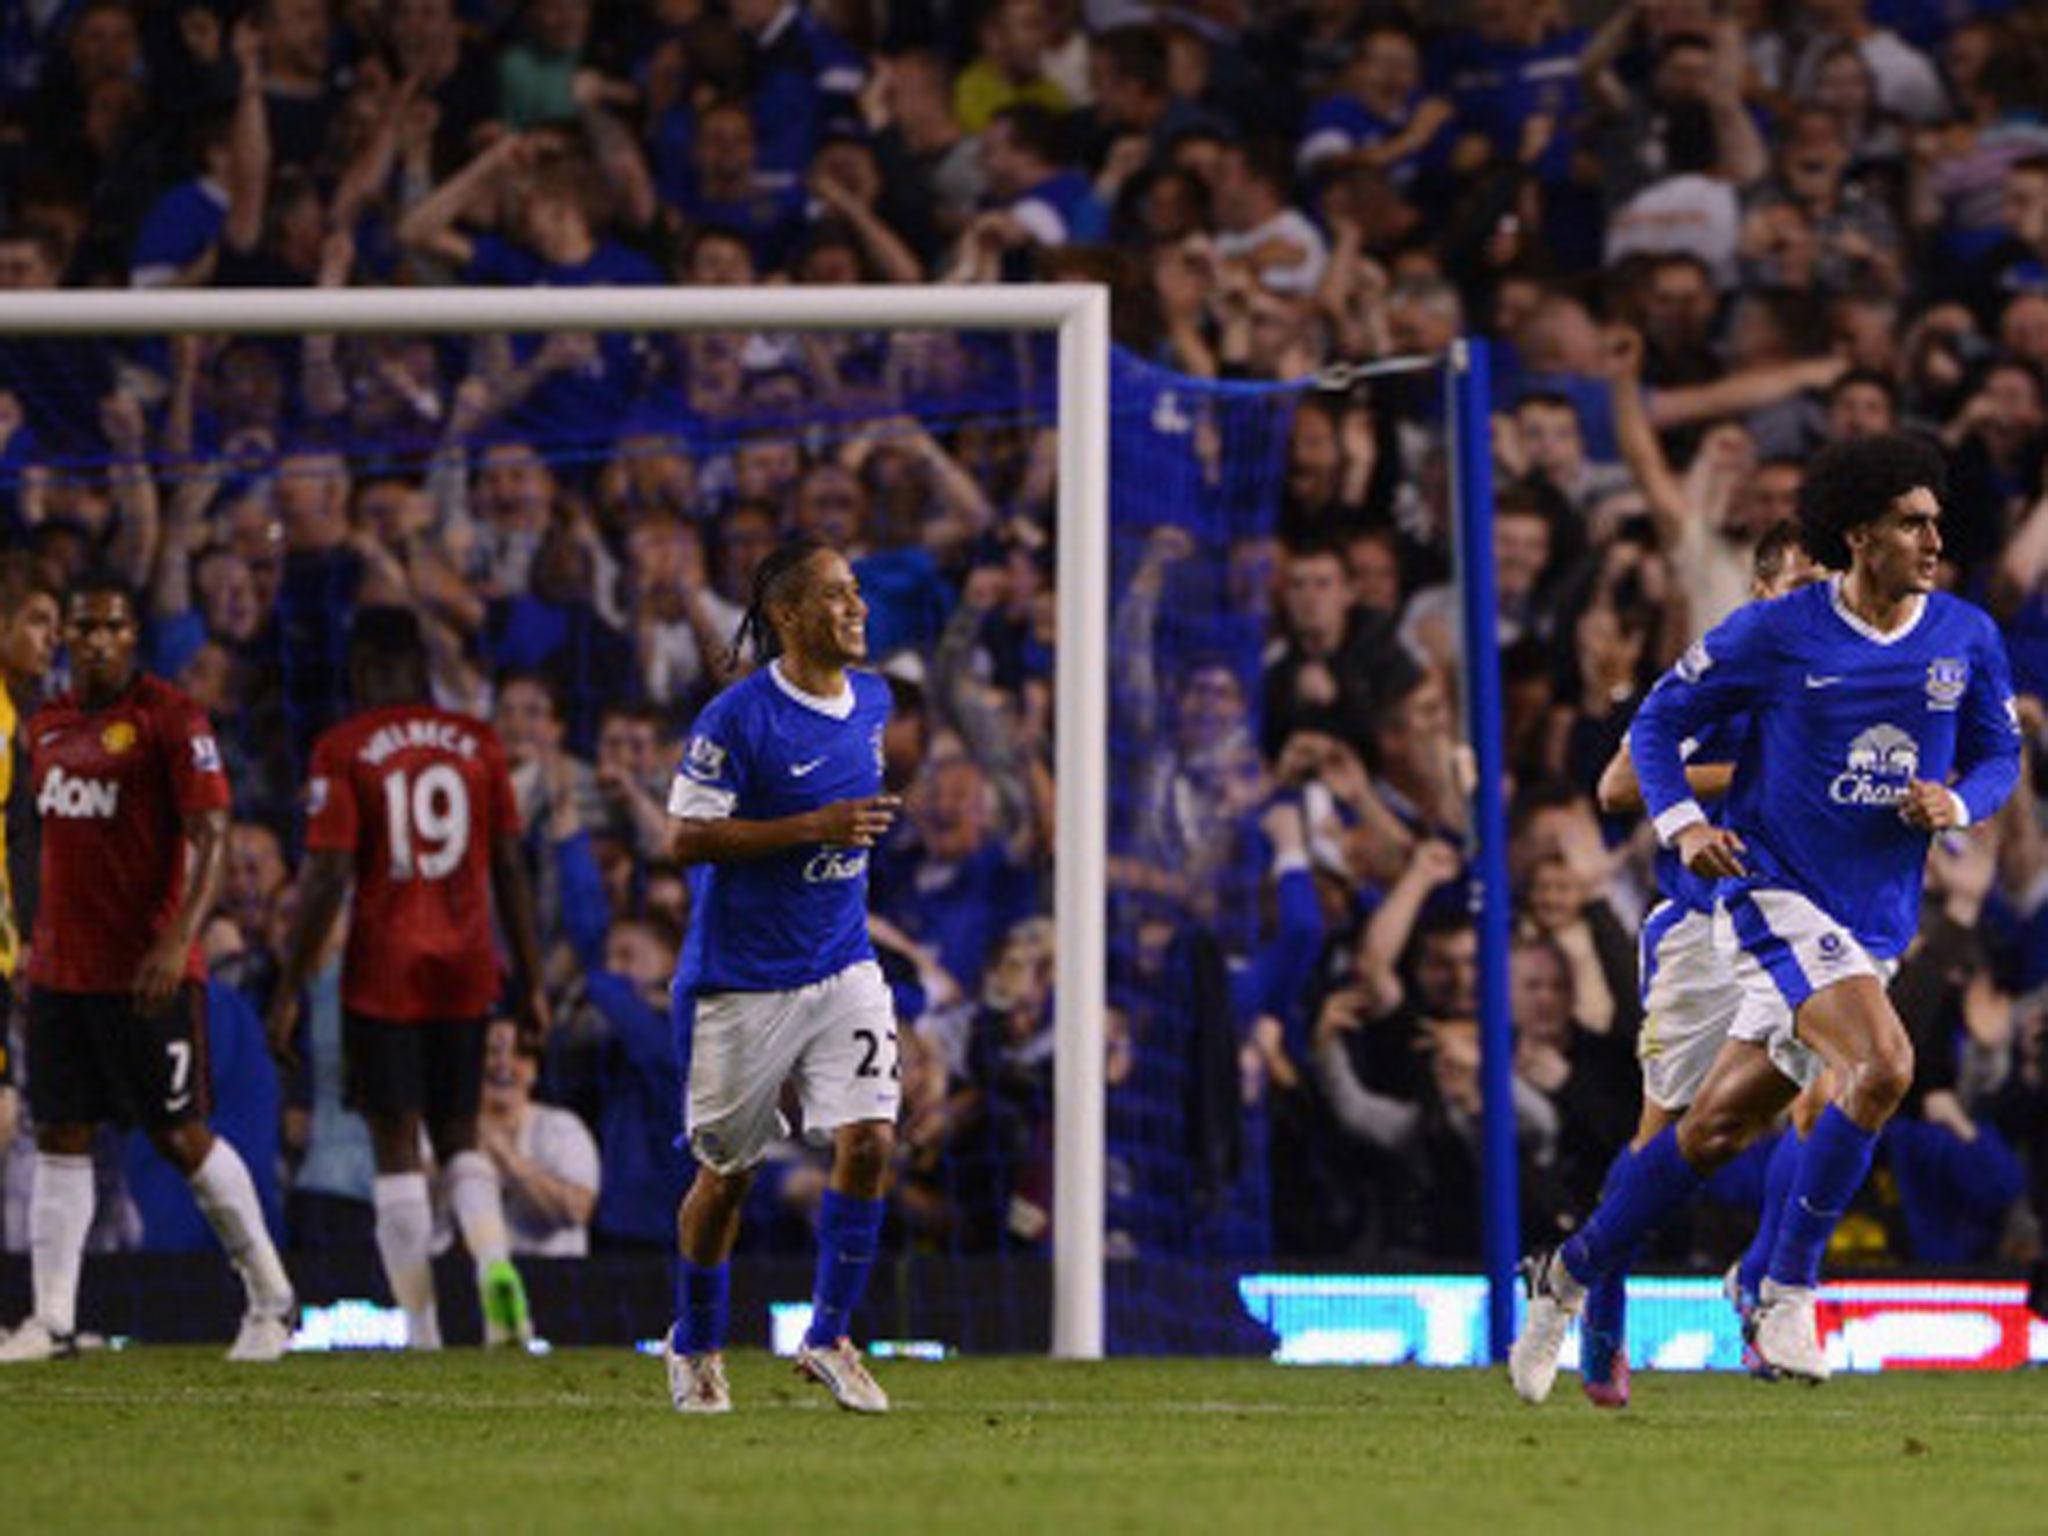 Everton's Marouane Fellaini scored the winner against Manchester United on the opening weekend of the 2012/13 season (Getty)